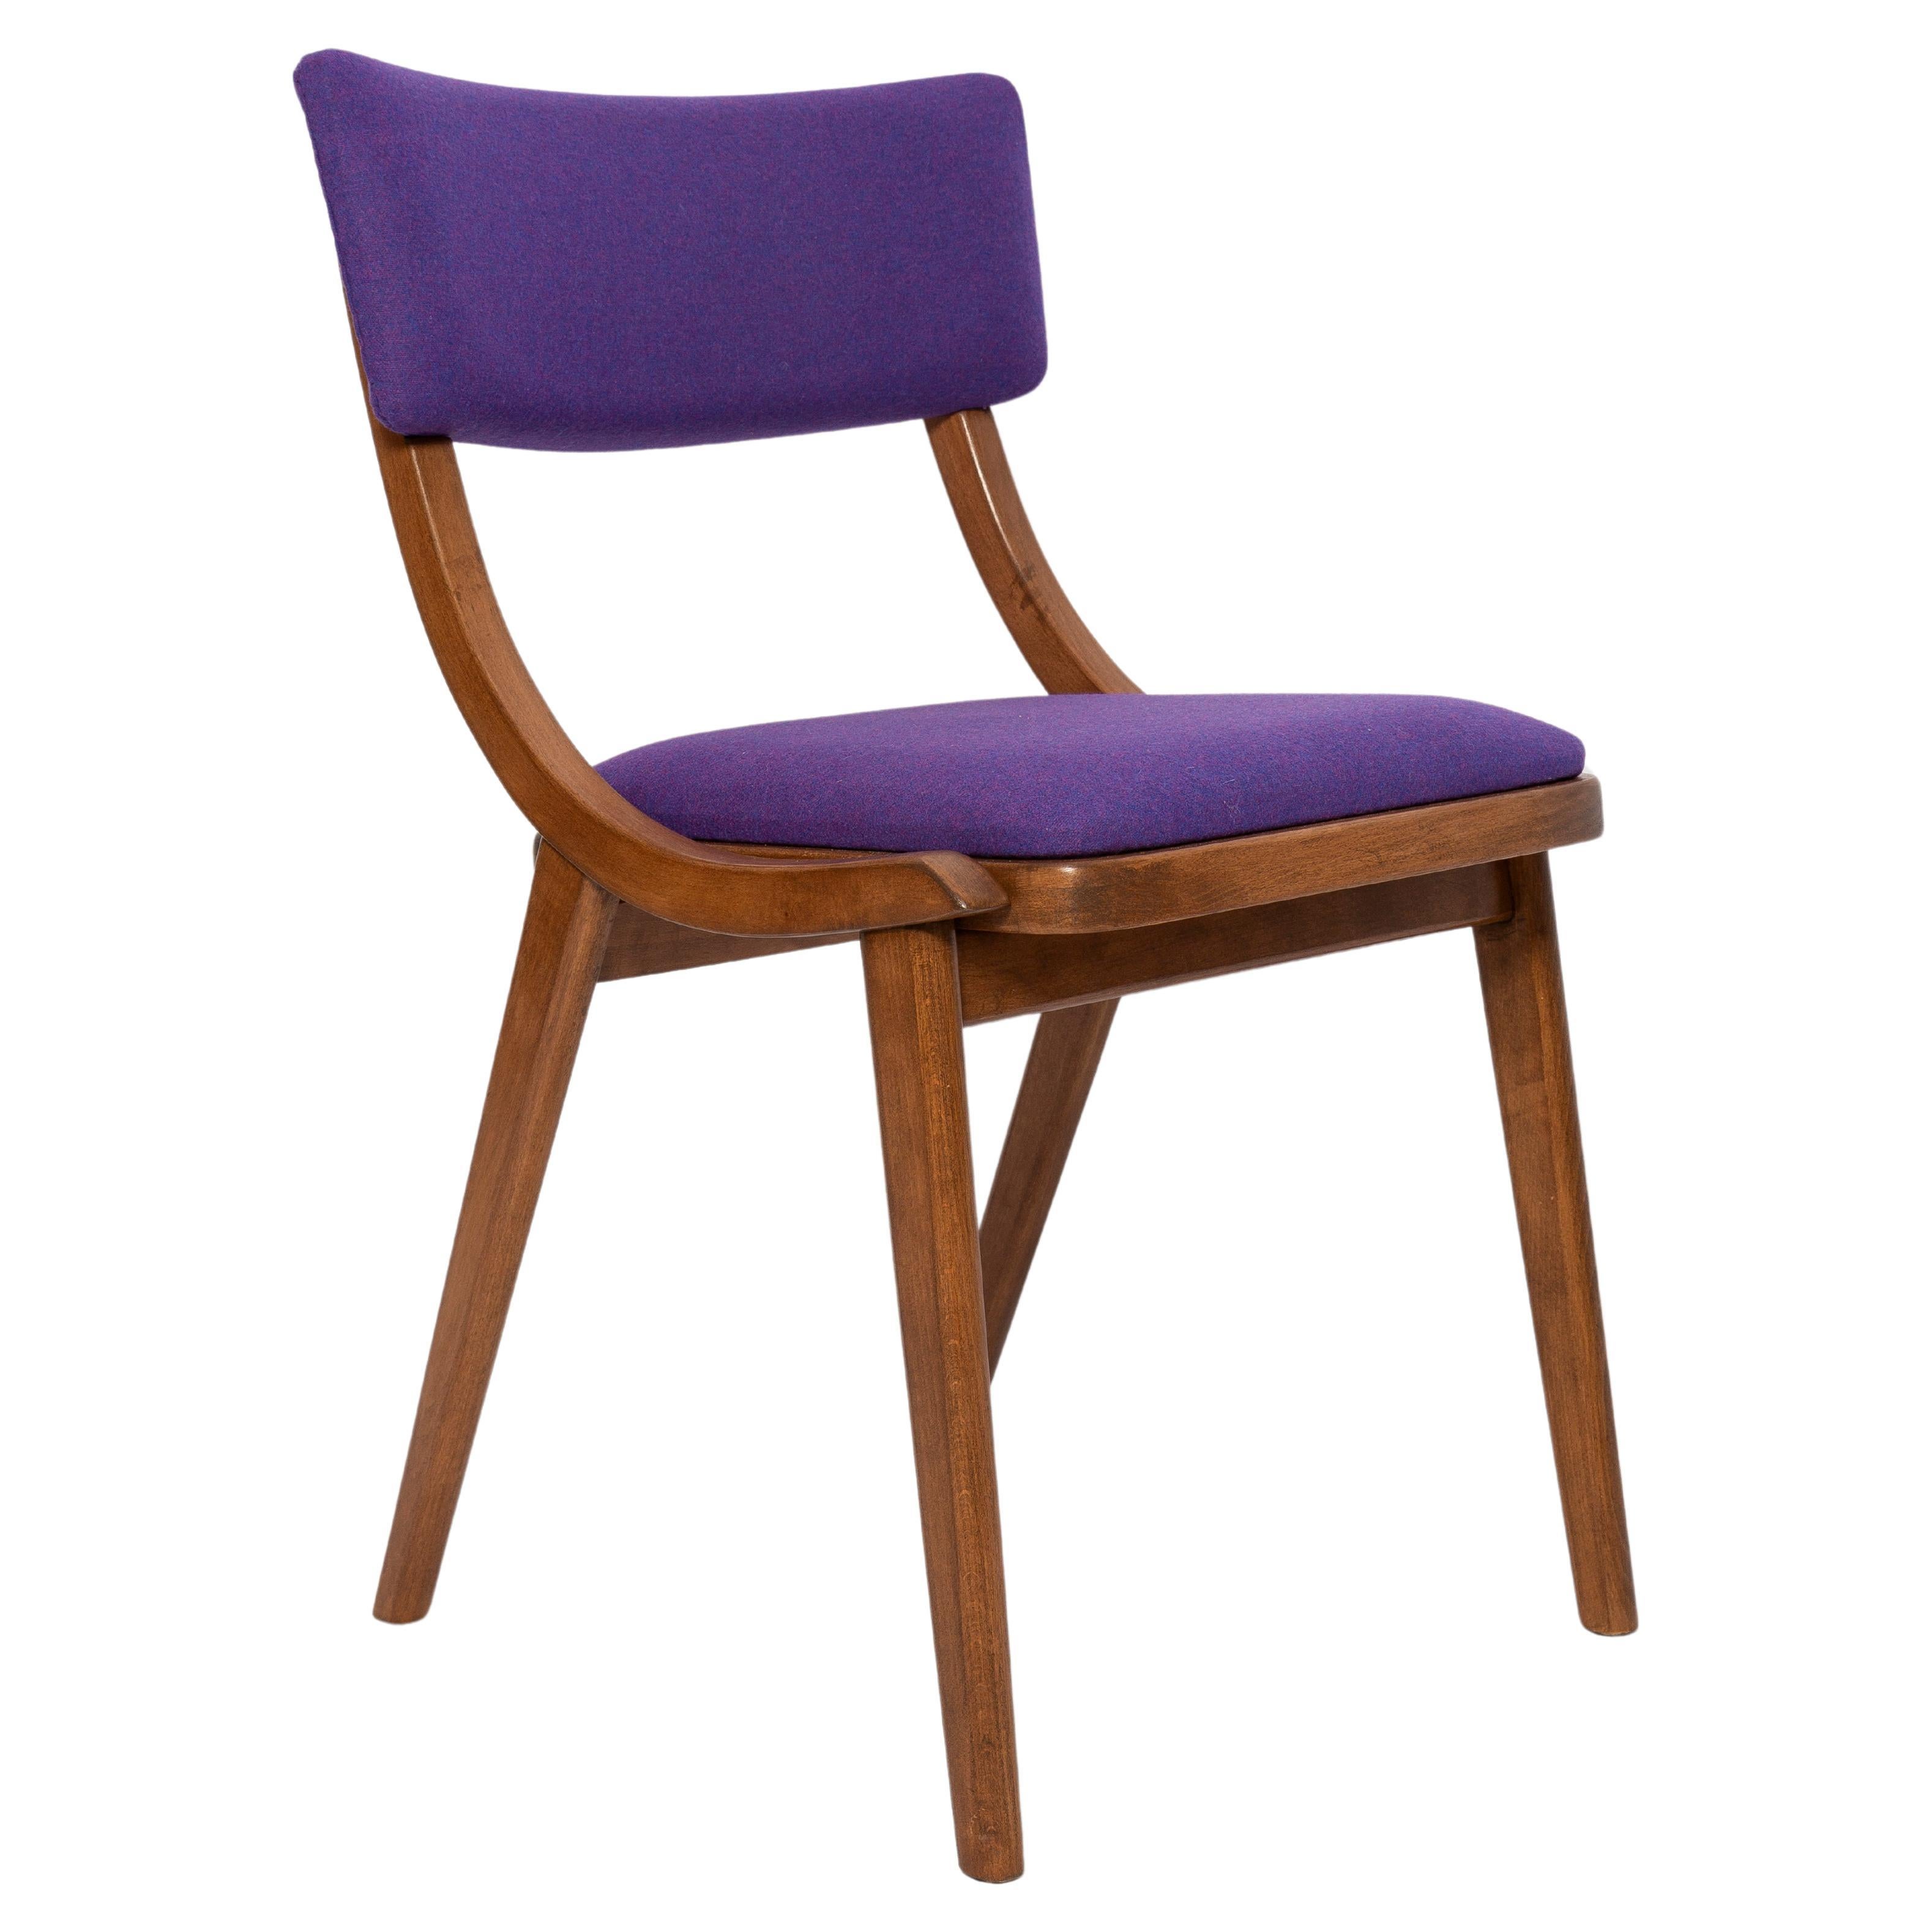 Mid Century Modern Bumerang Chair, Purple Violet Wool, Poland, 1960s For Sale